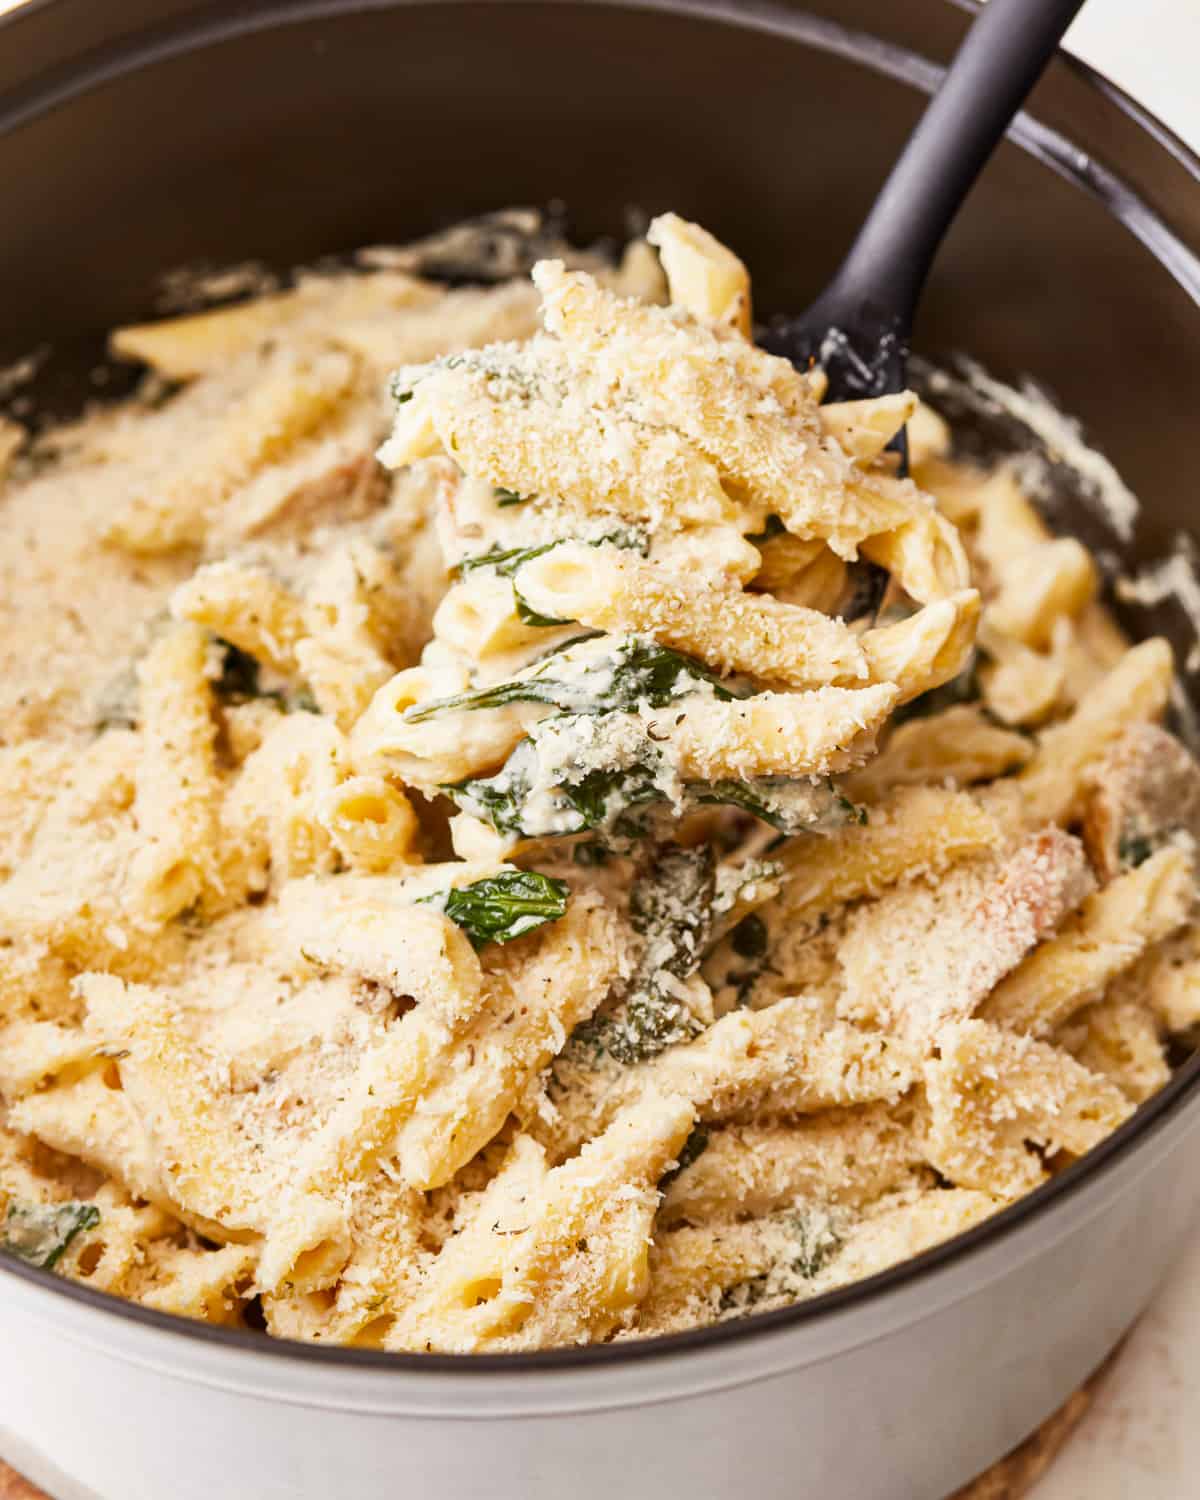 Penne pasta with chicken and spinach in a pan.